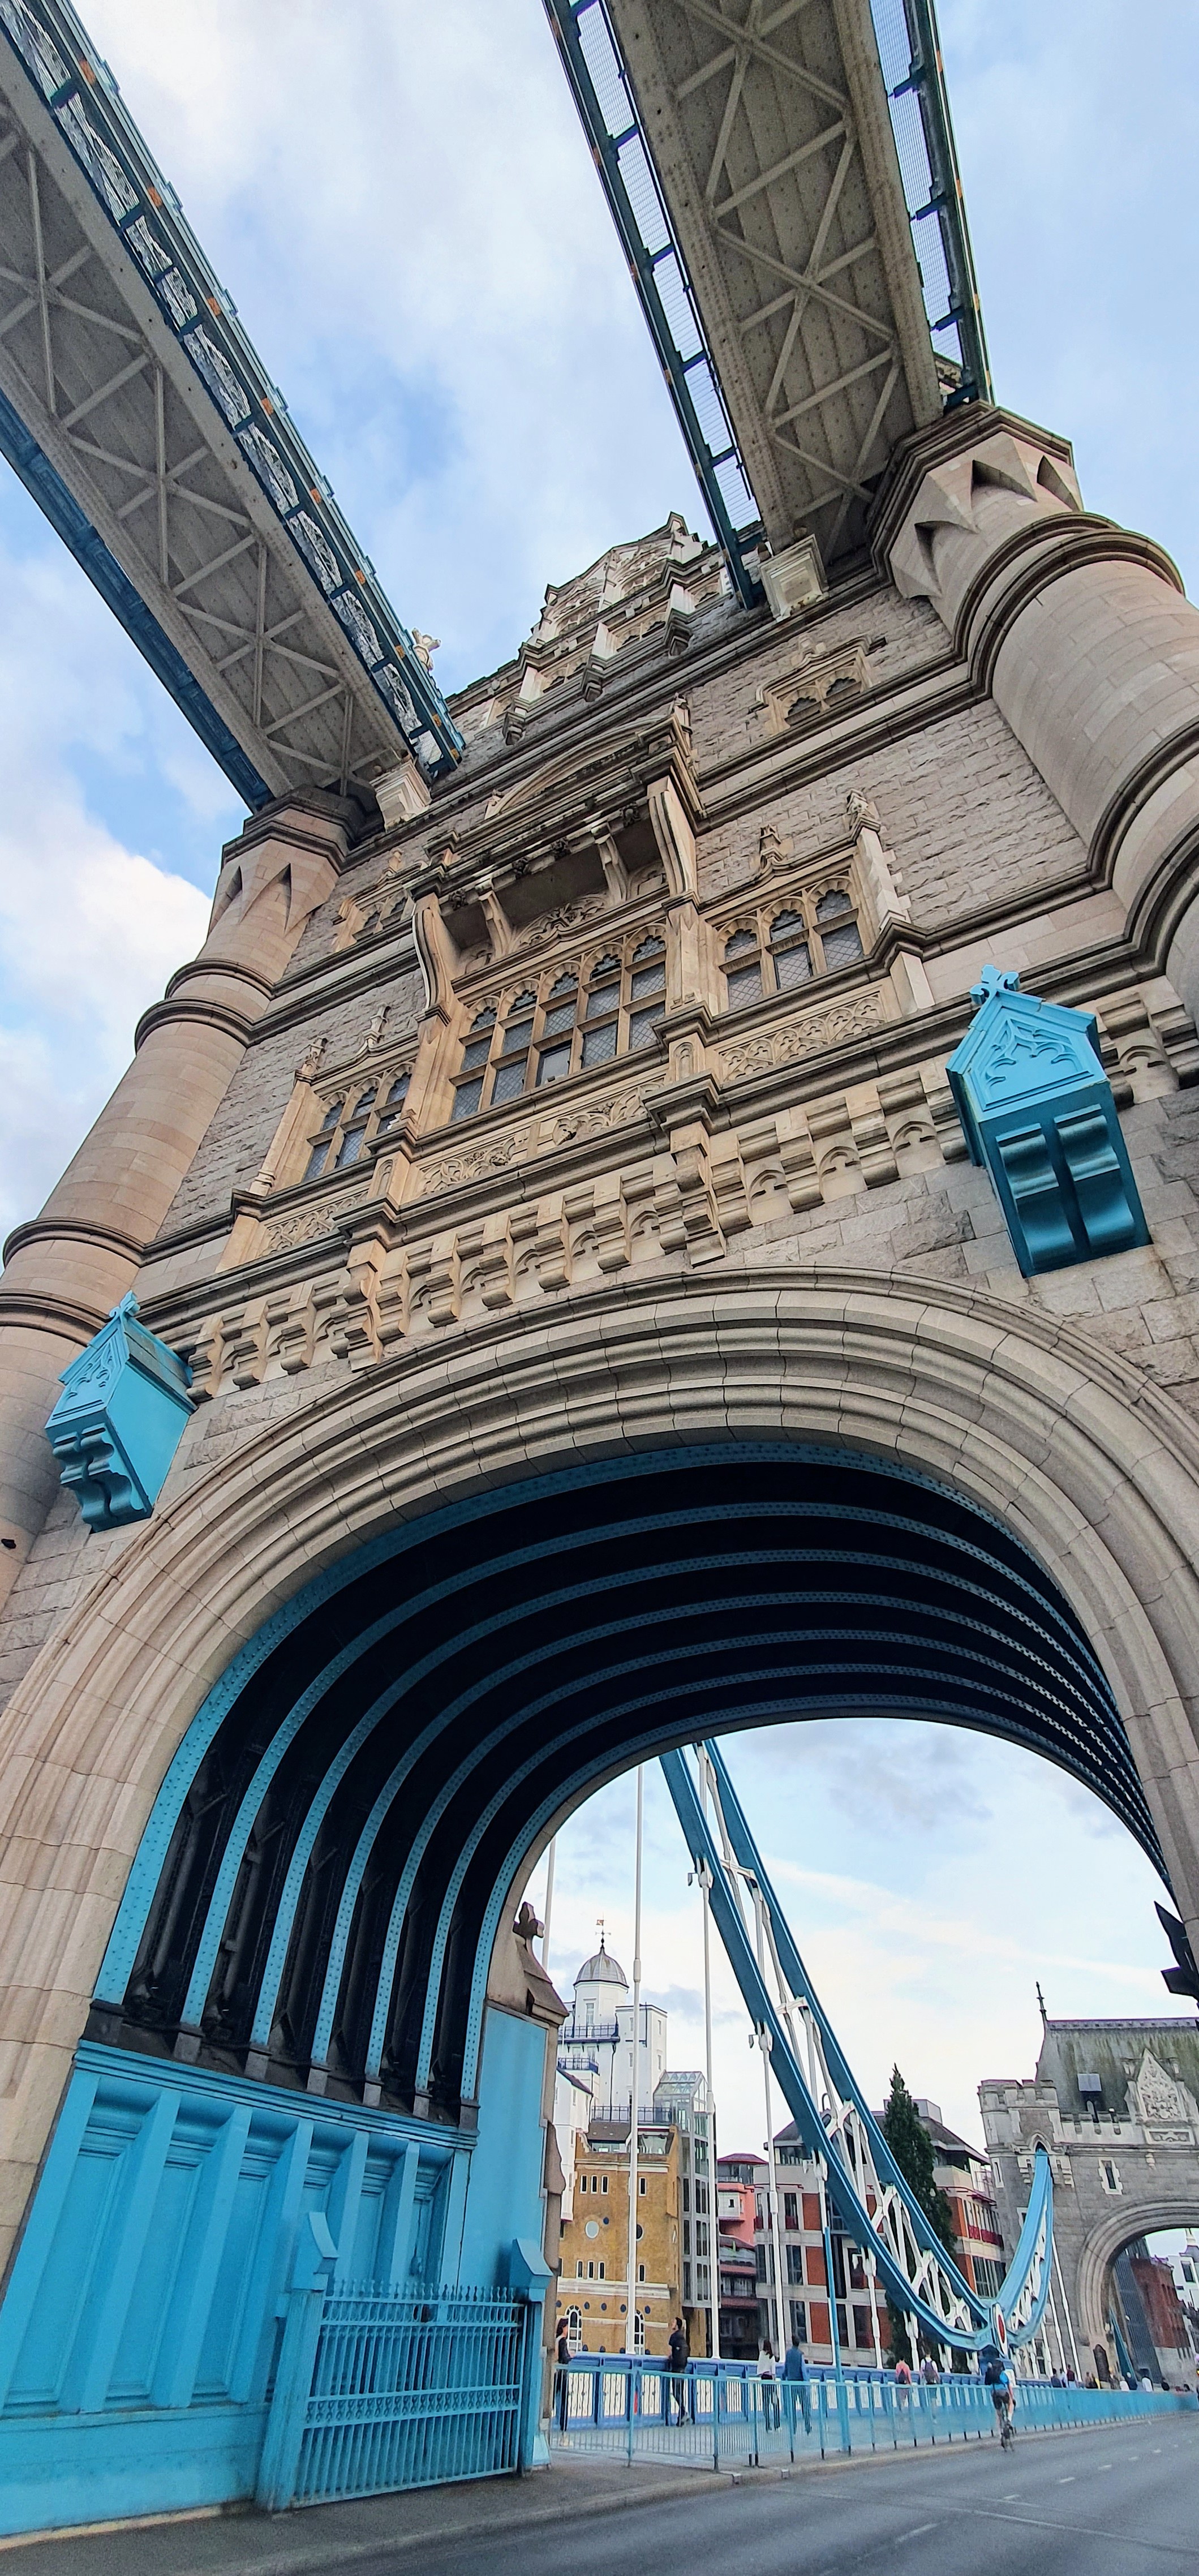 Exterior of the south tower and underside of the walkway, Tower Bridge, London